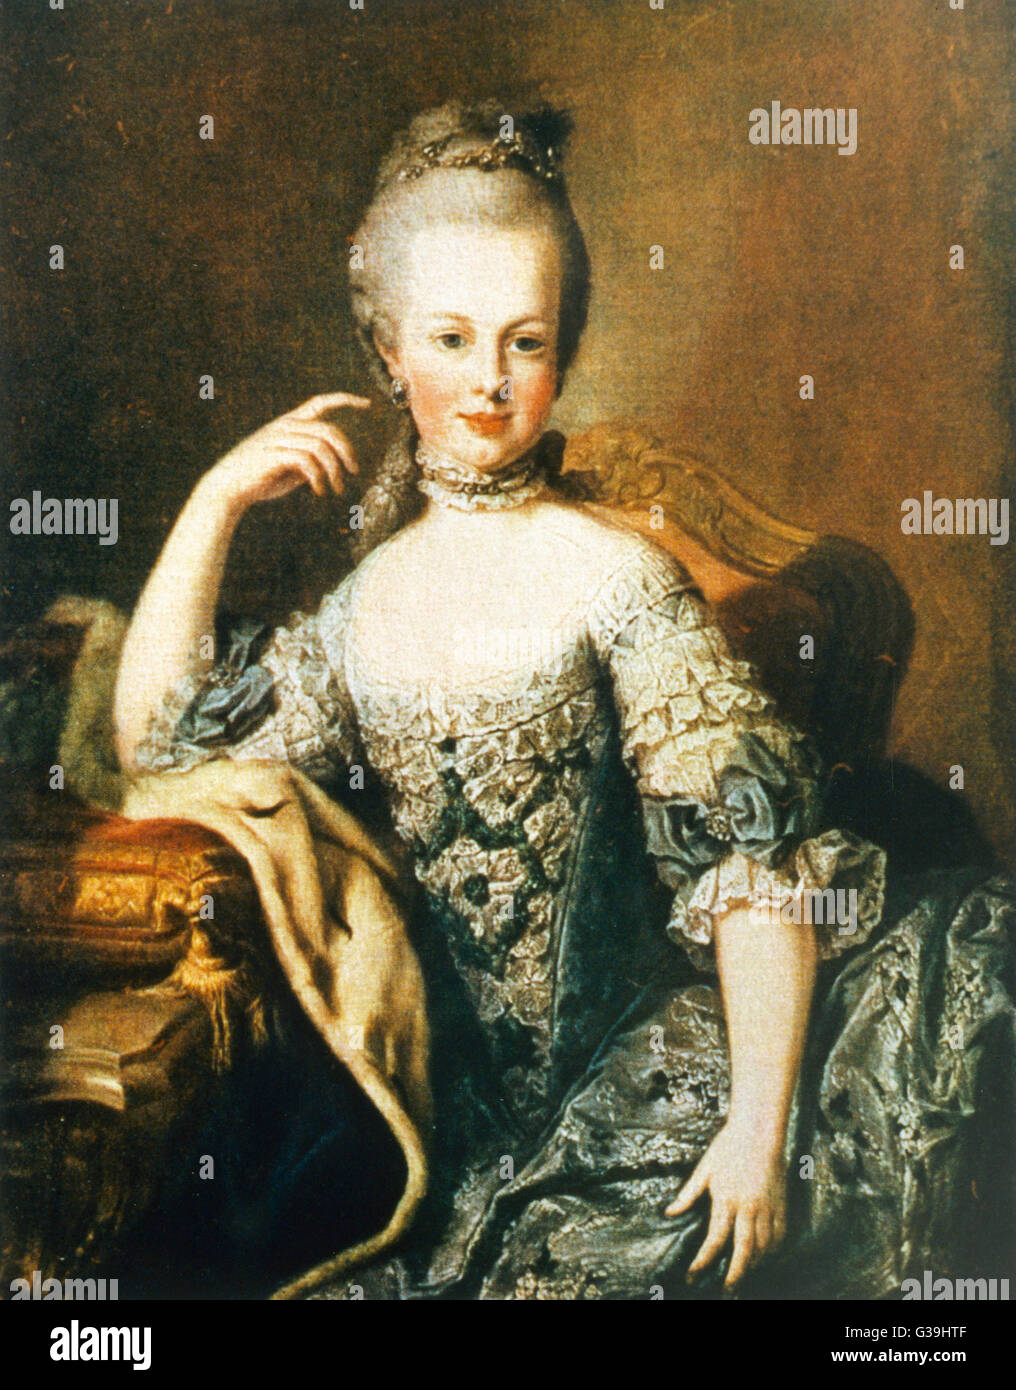 Archduchess Maria Josepha of Austria (1751-1767), who is an other  daughter of empress Maria Theresia     Date: circa 1767 Stock Photo